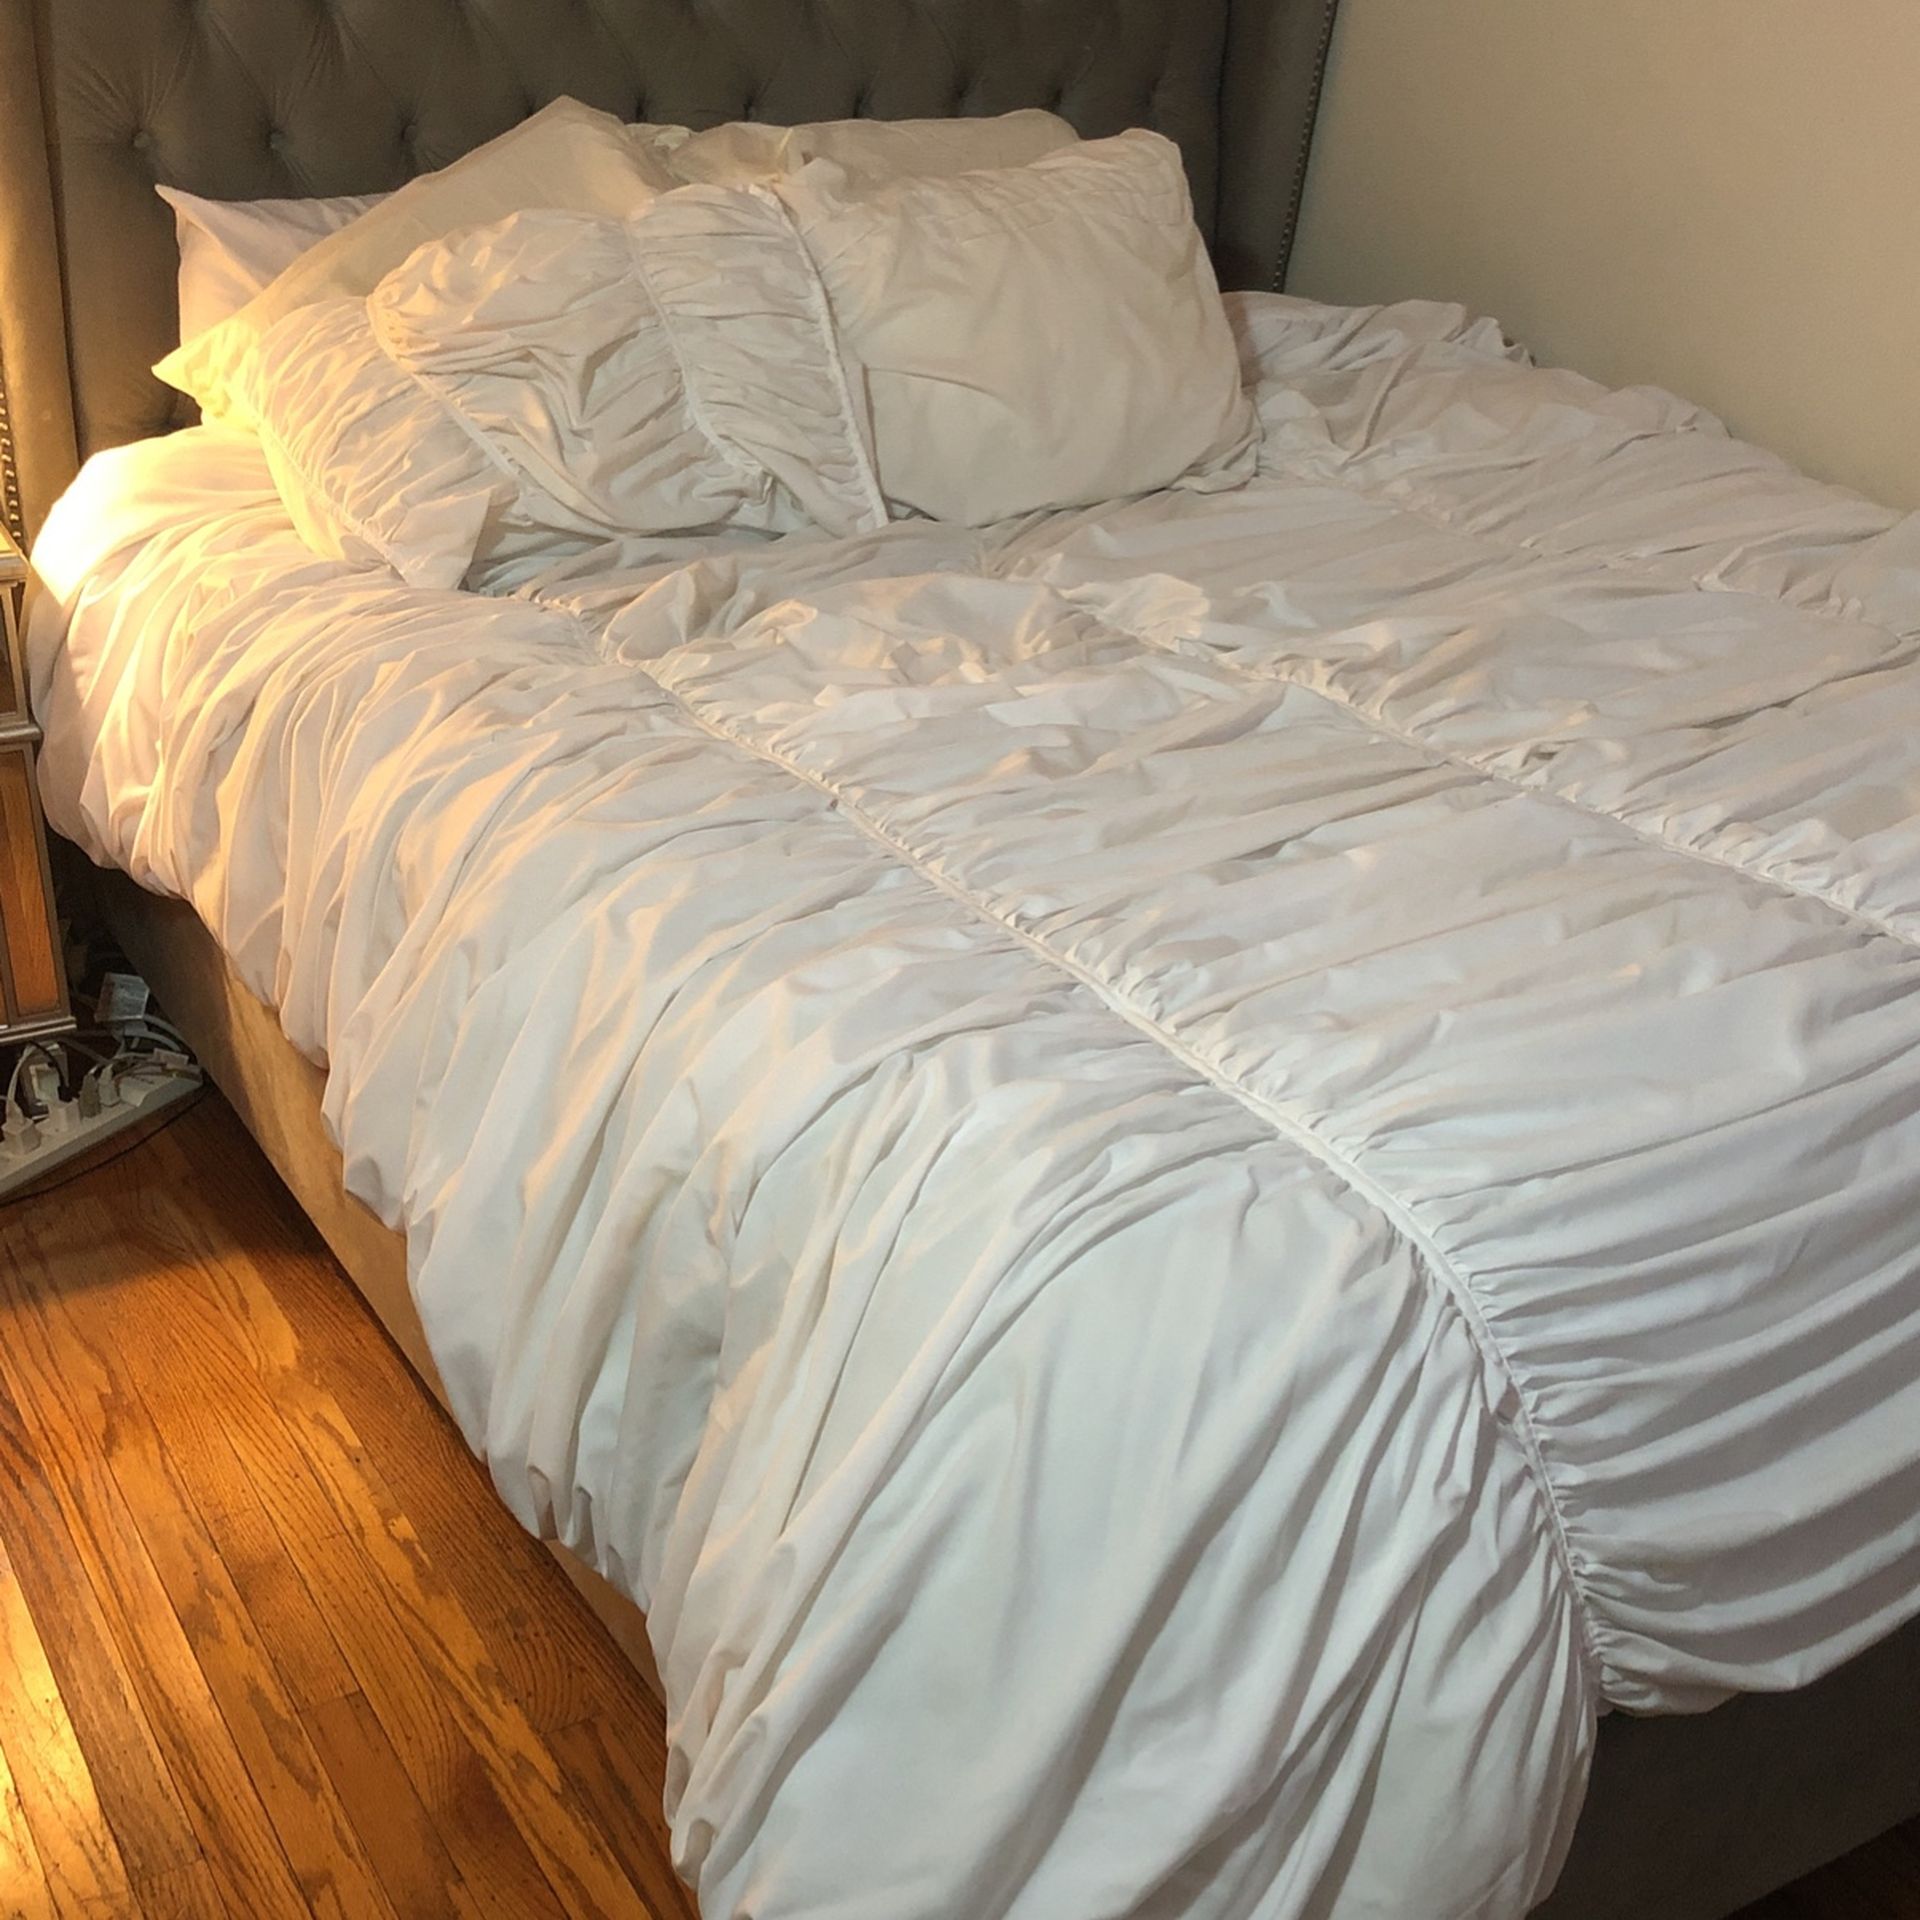 Free Box Spring Queen